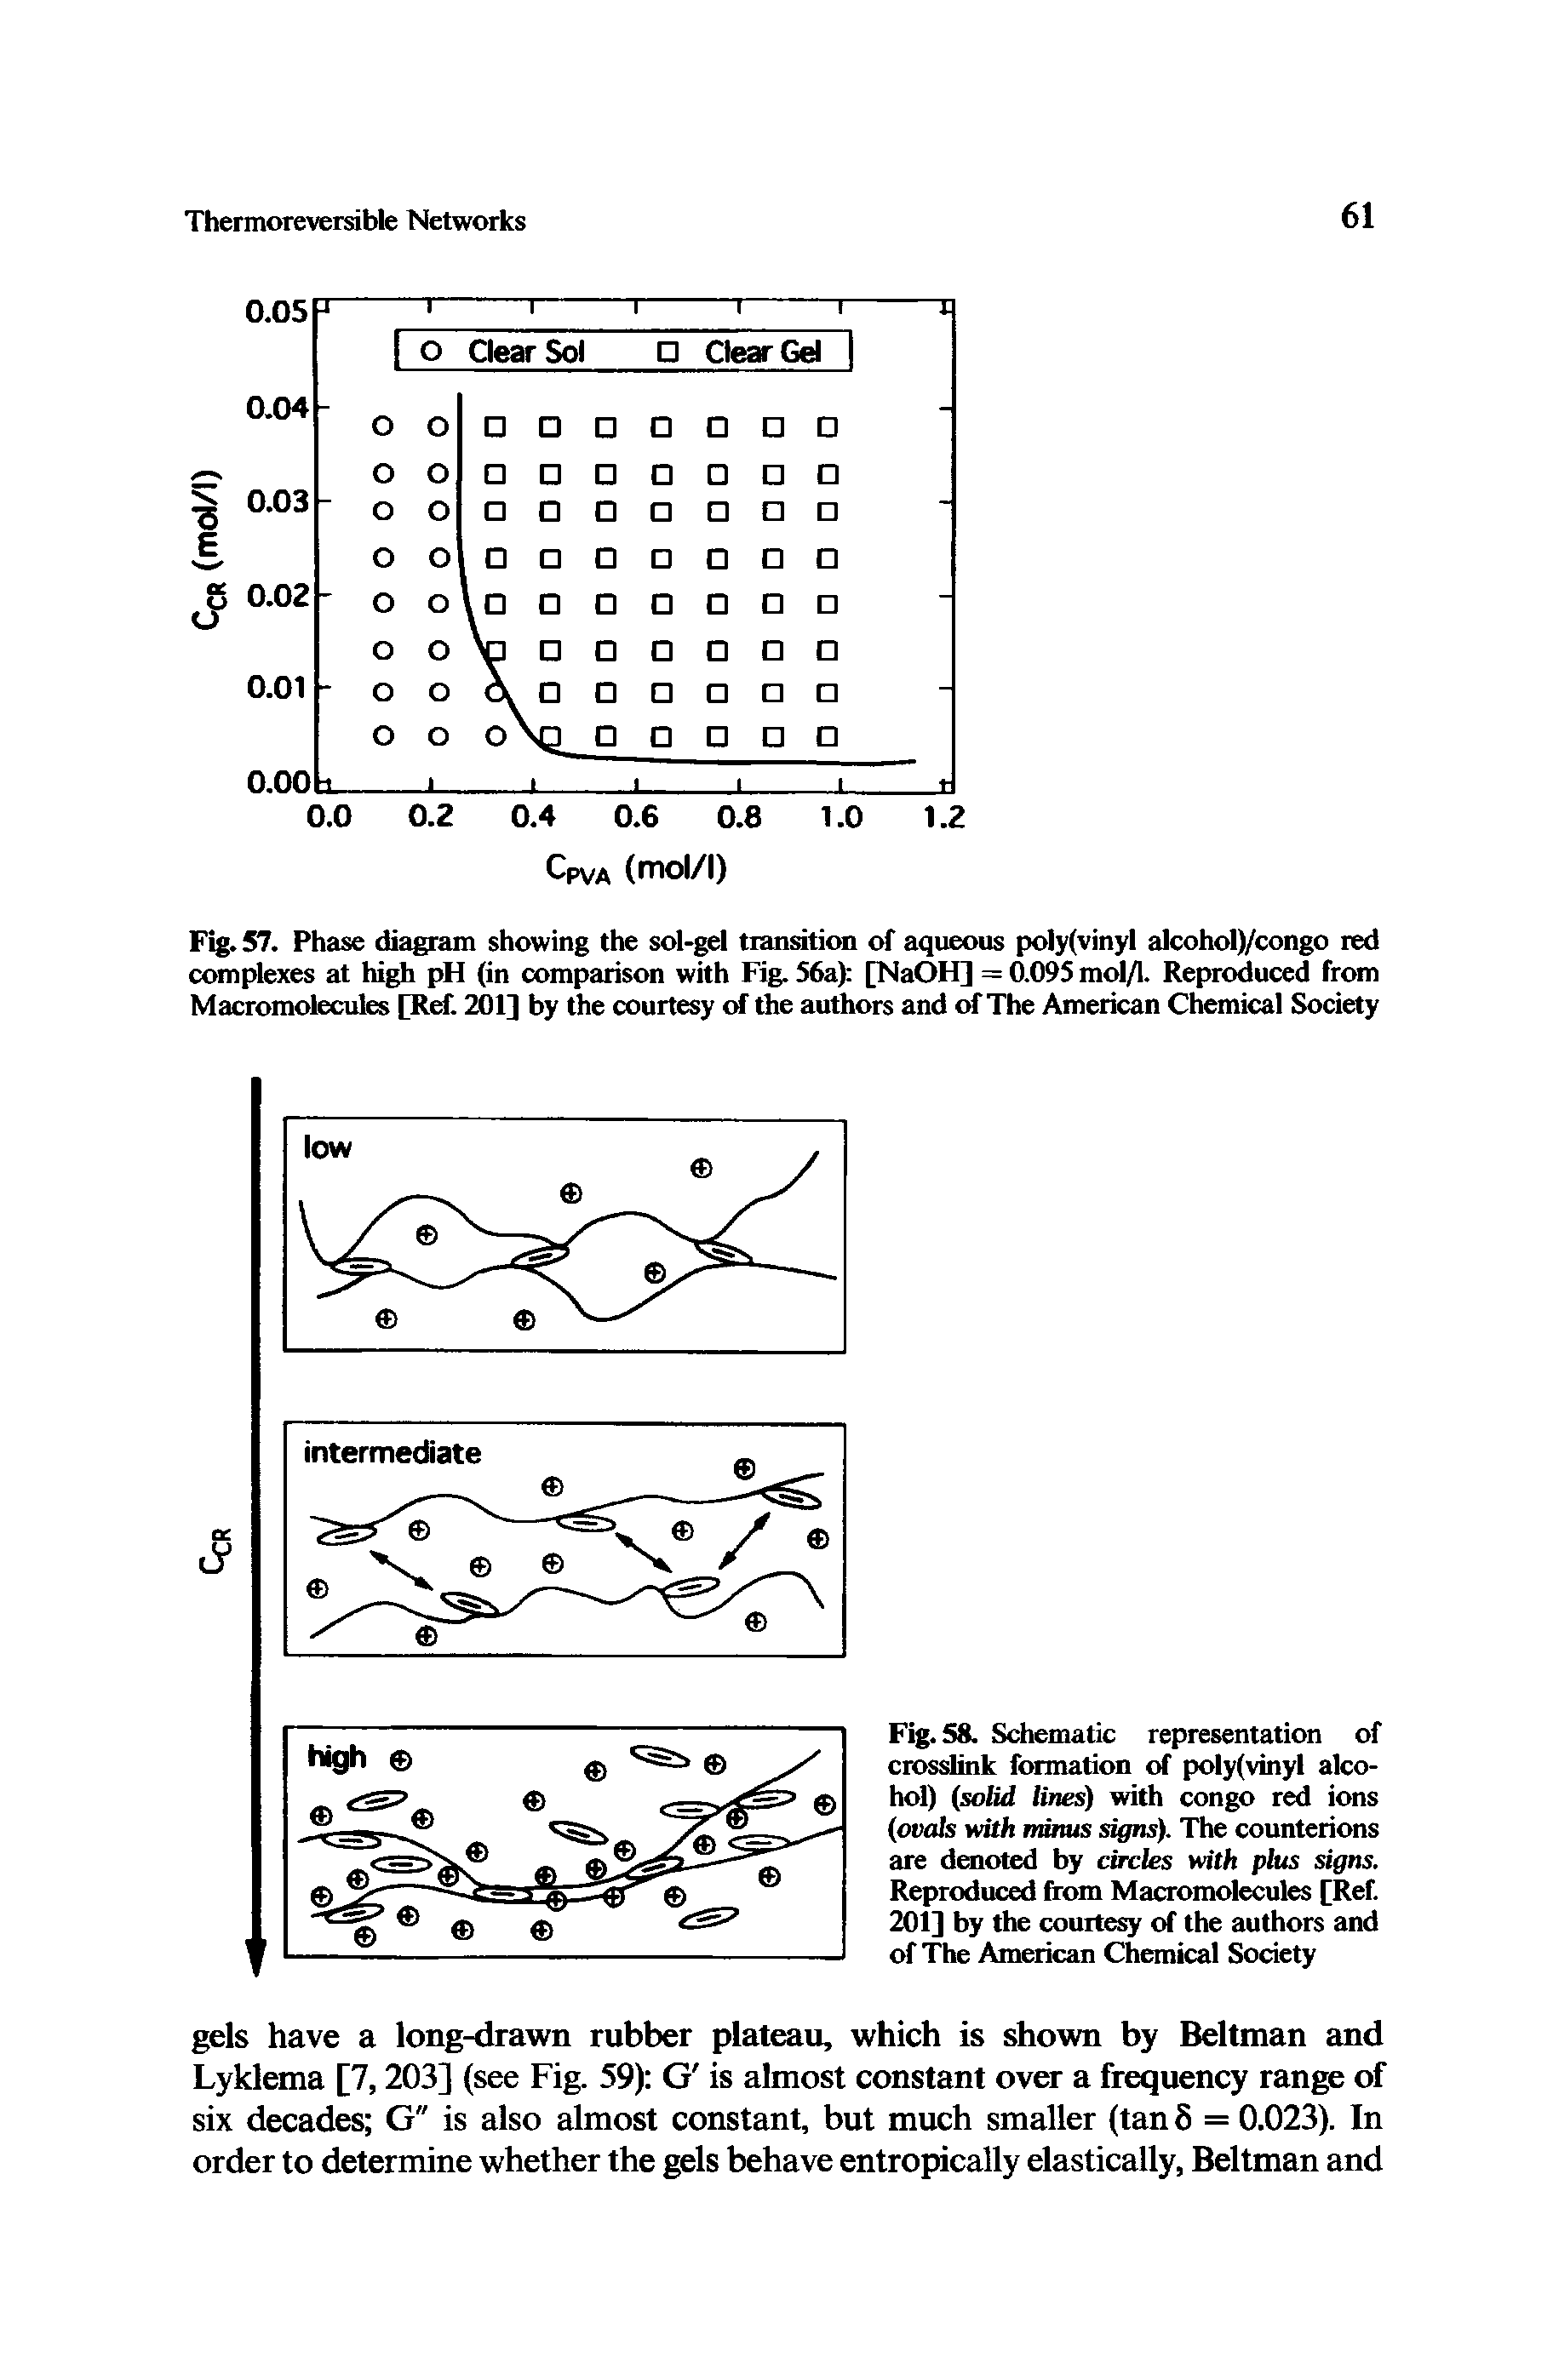 Fig. 58. Schematic representation of crosslink formation of poly(vinyl alcohol) (solid lines) with Congo red ions (ovids with minus signs). The counterions are denoted by circles with plus signs. Reproduced from Macromolecules [Ref. 201] by the courteqr of the authors and of The American Chemical Society...